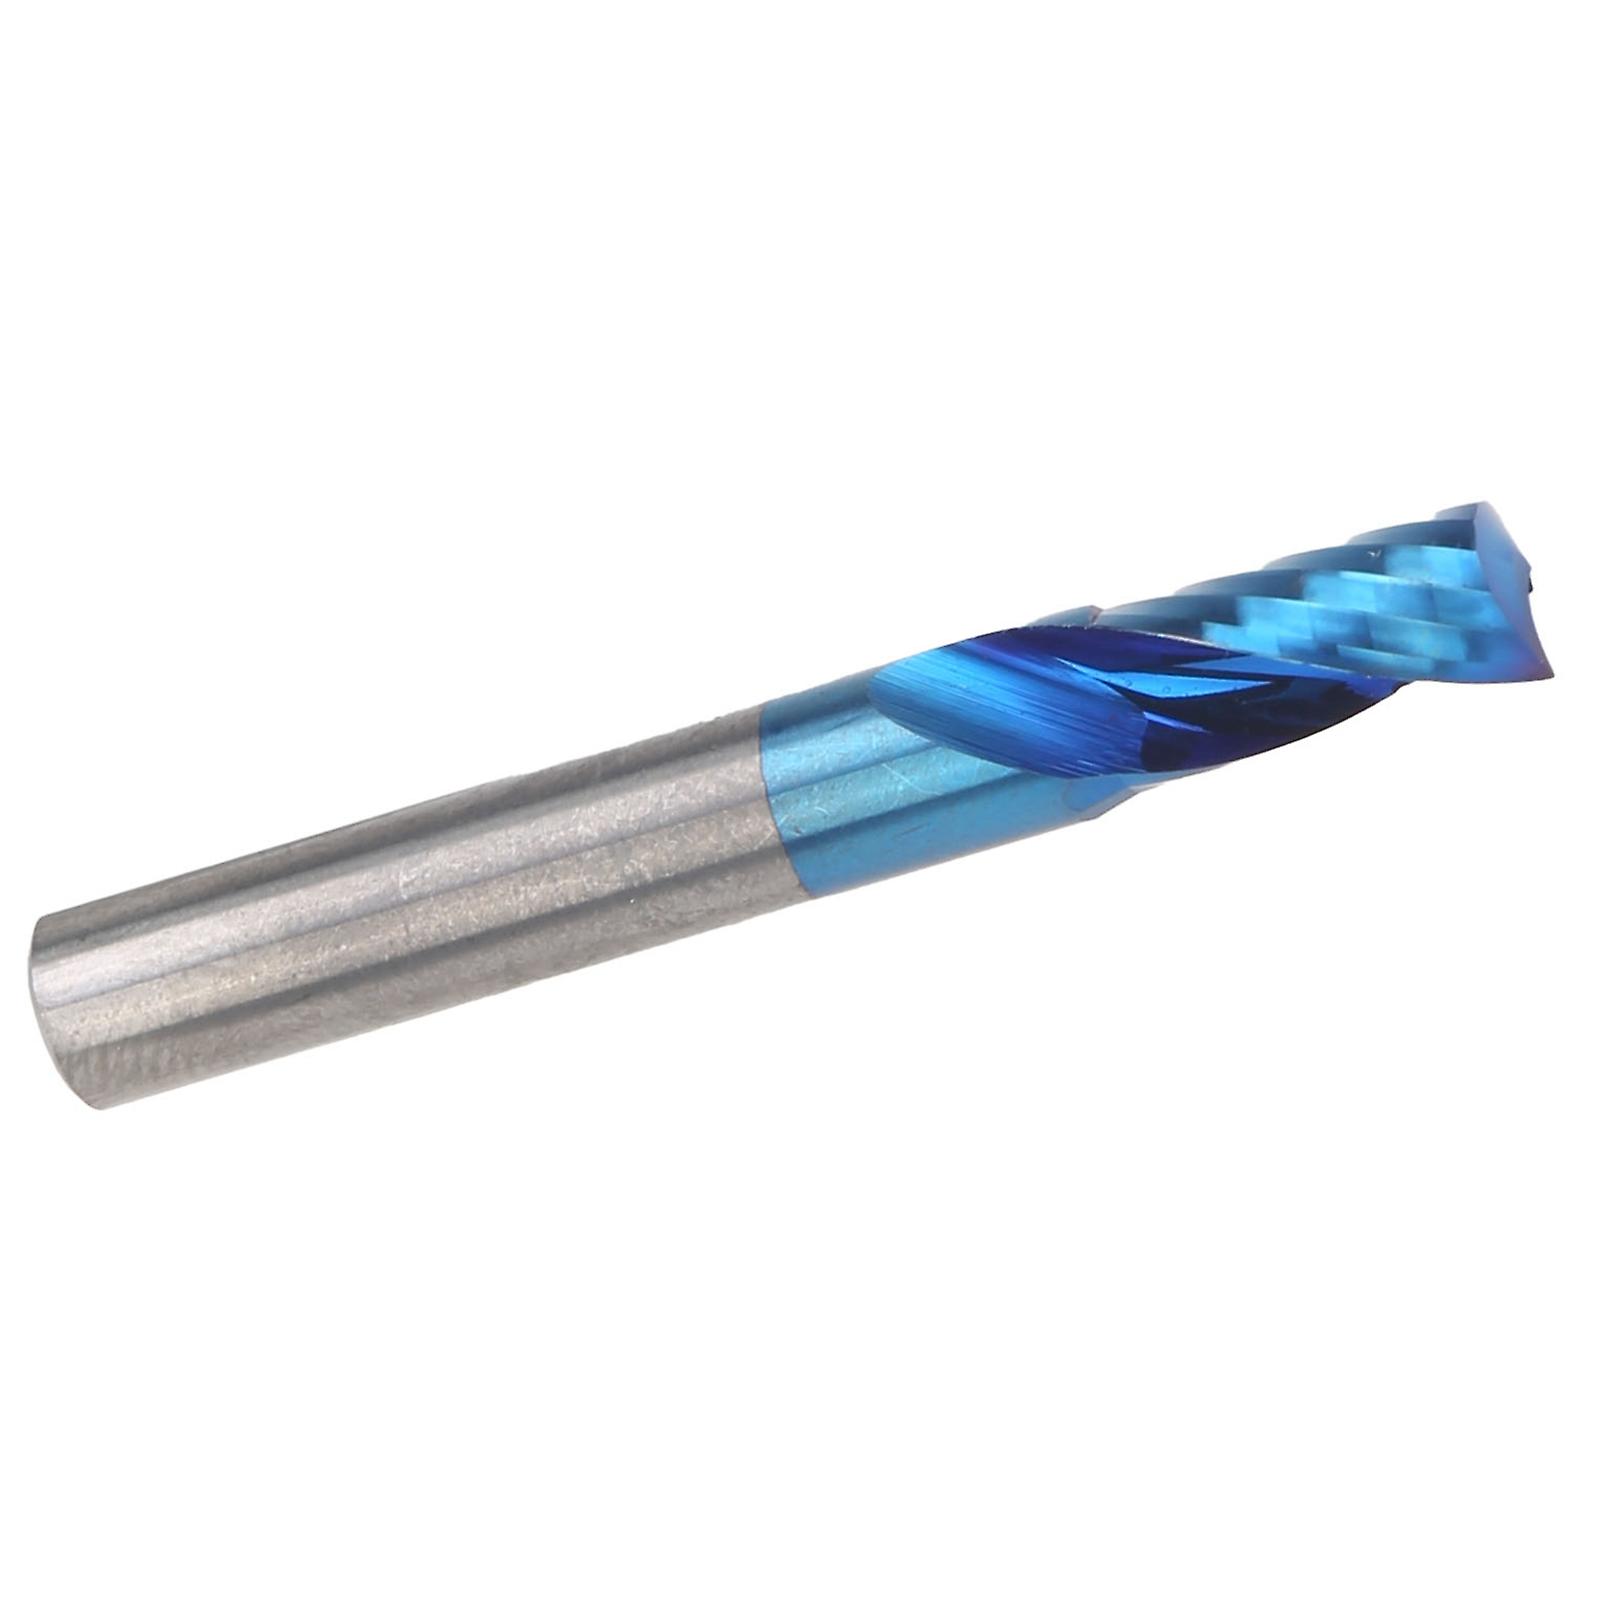 Spiral Milling Cutter Single Blade Tungsten Steel Blue Plating Hardware Cnc Tools 6x12x45